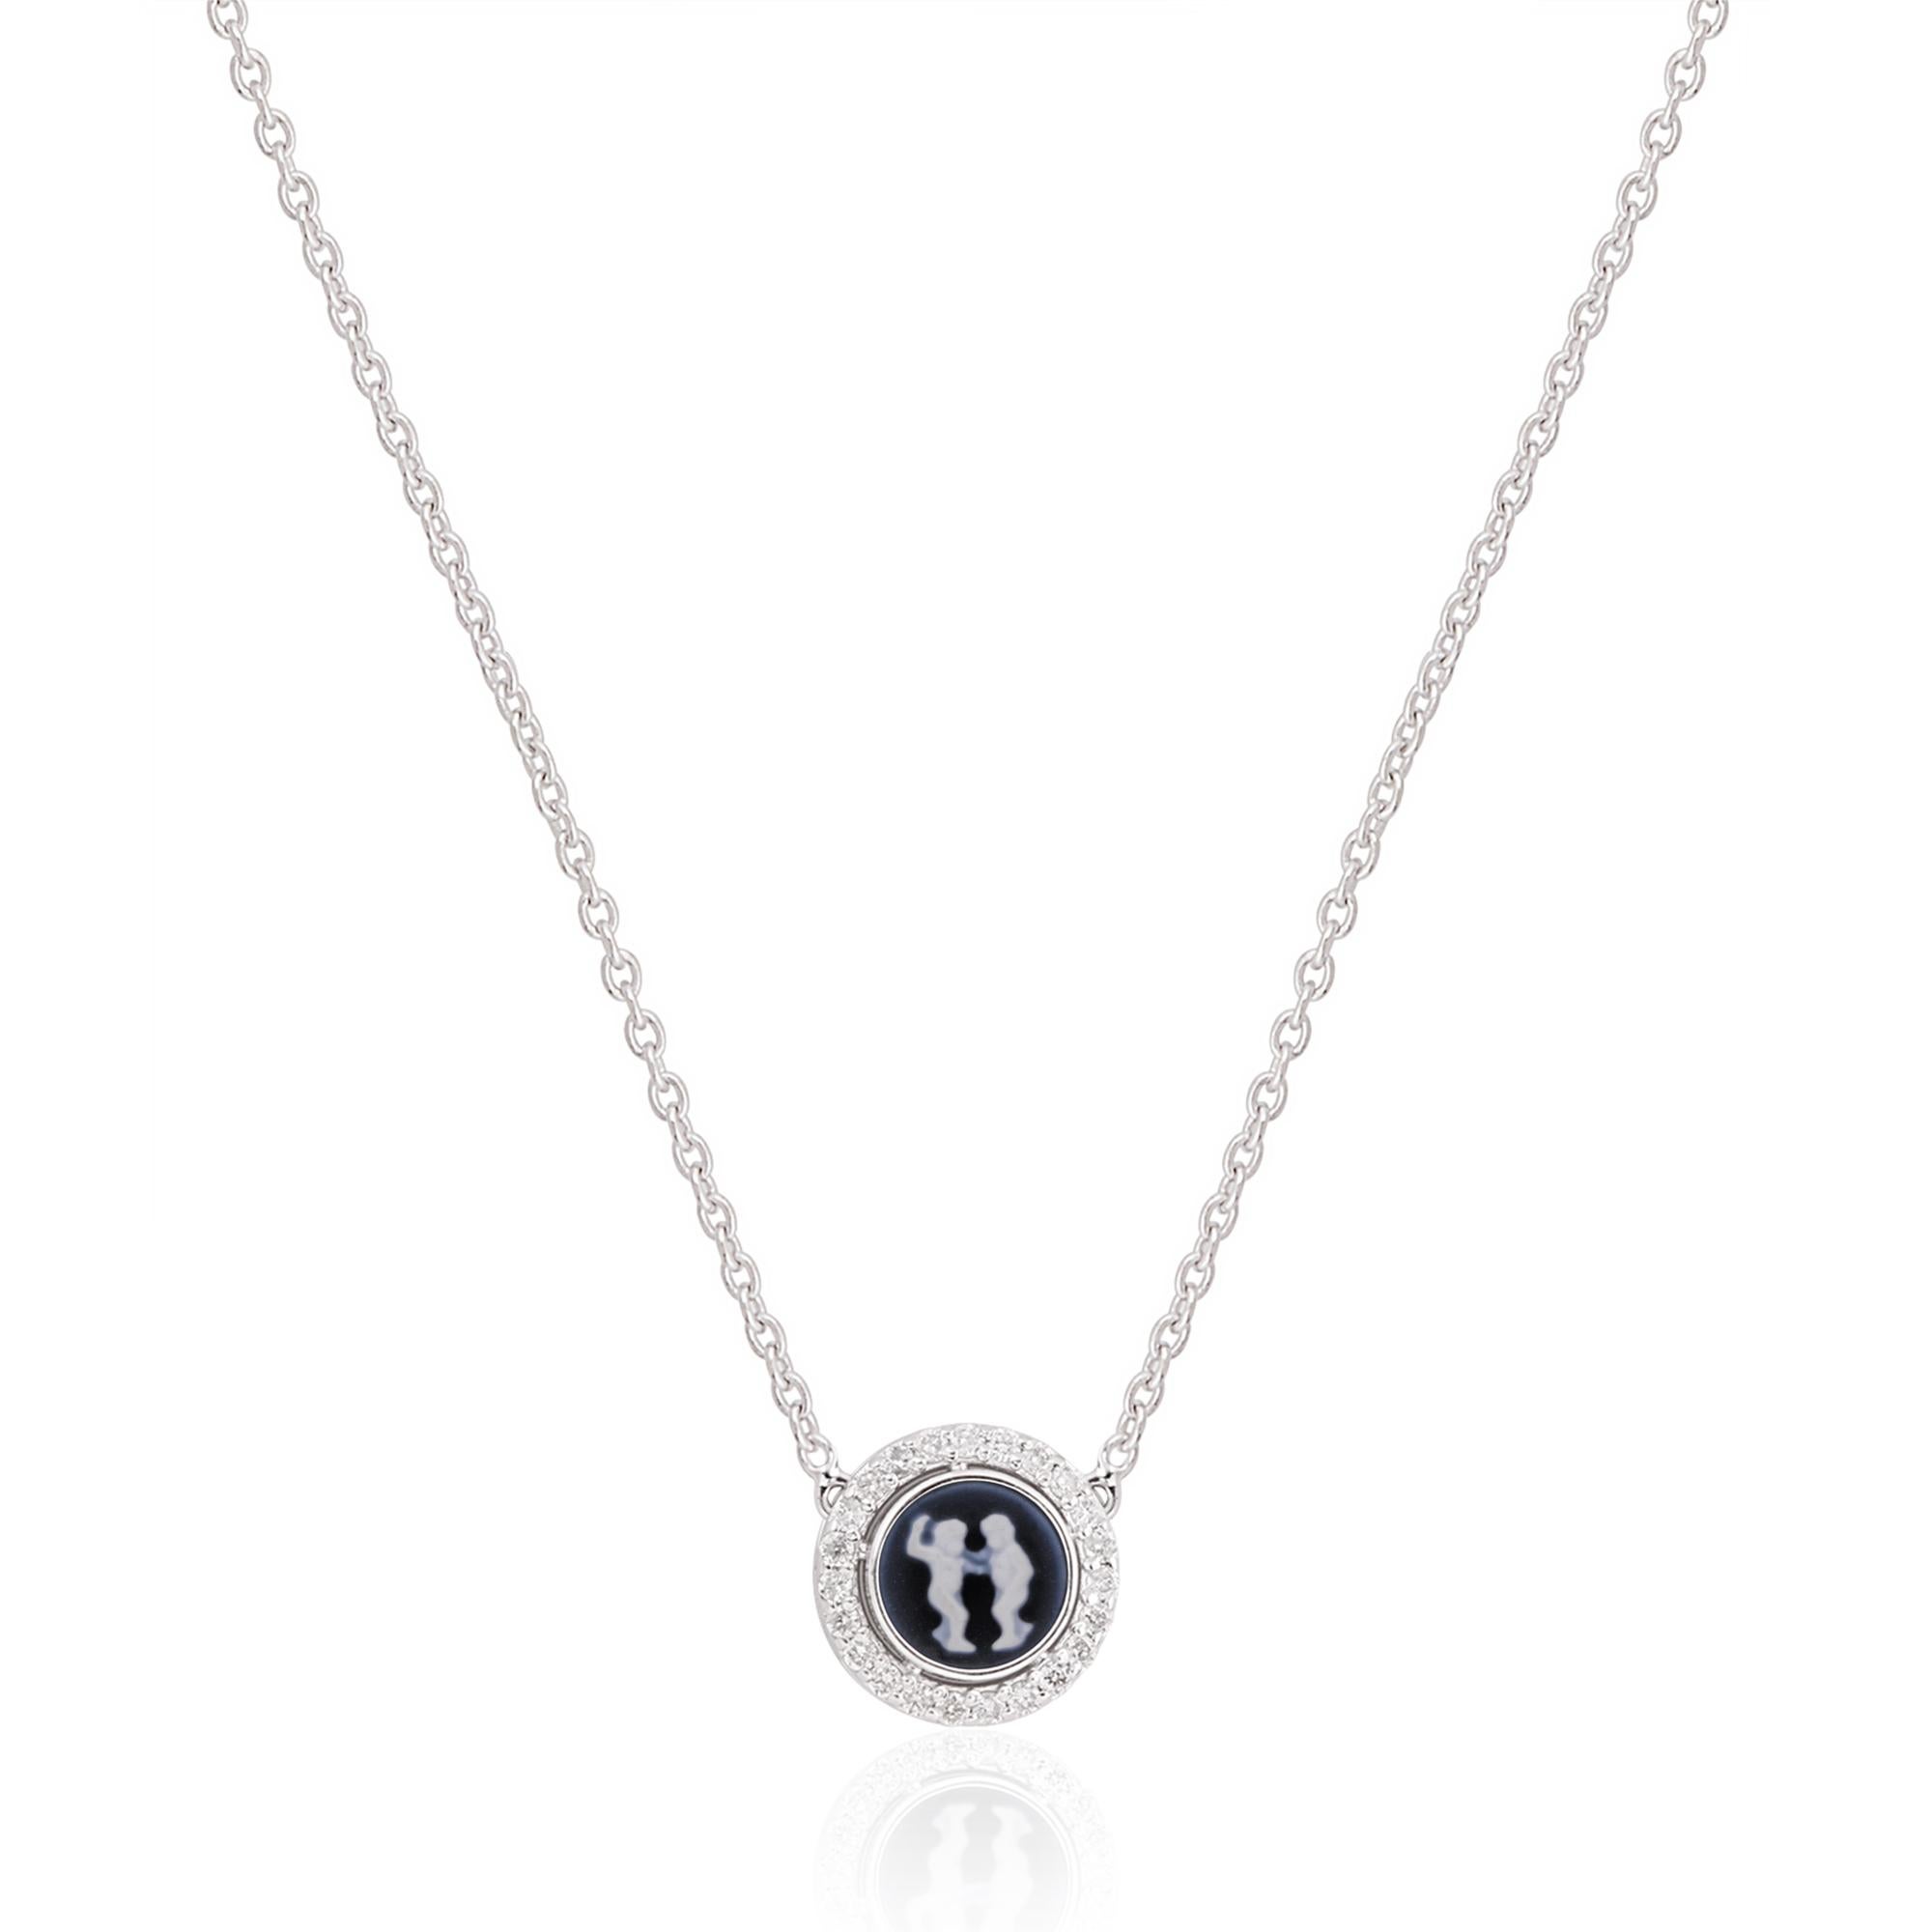 The centerpiece of this necklace is the Gemini zodiac charm, expertly crafted to capture the duality and versatility of the Gemini sign. The symbol represents the twins, symbolizing curiosity, adaptability, and communication skills.

Item Code :-